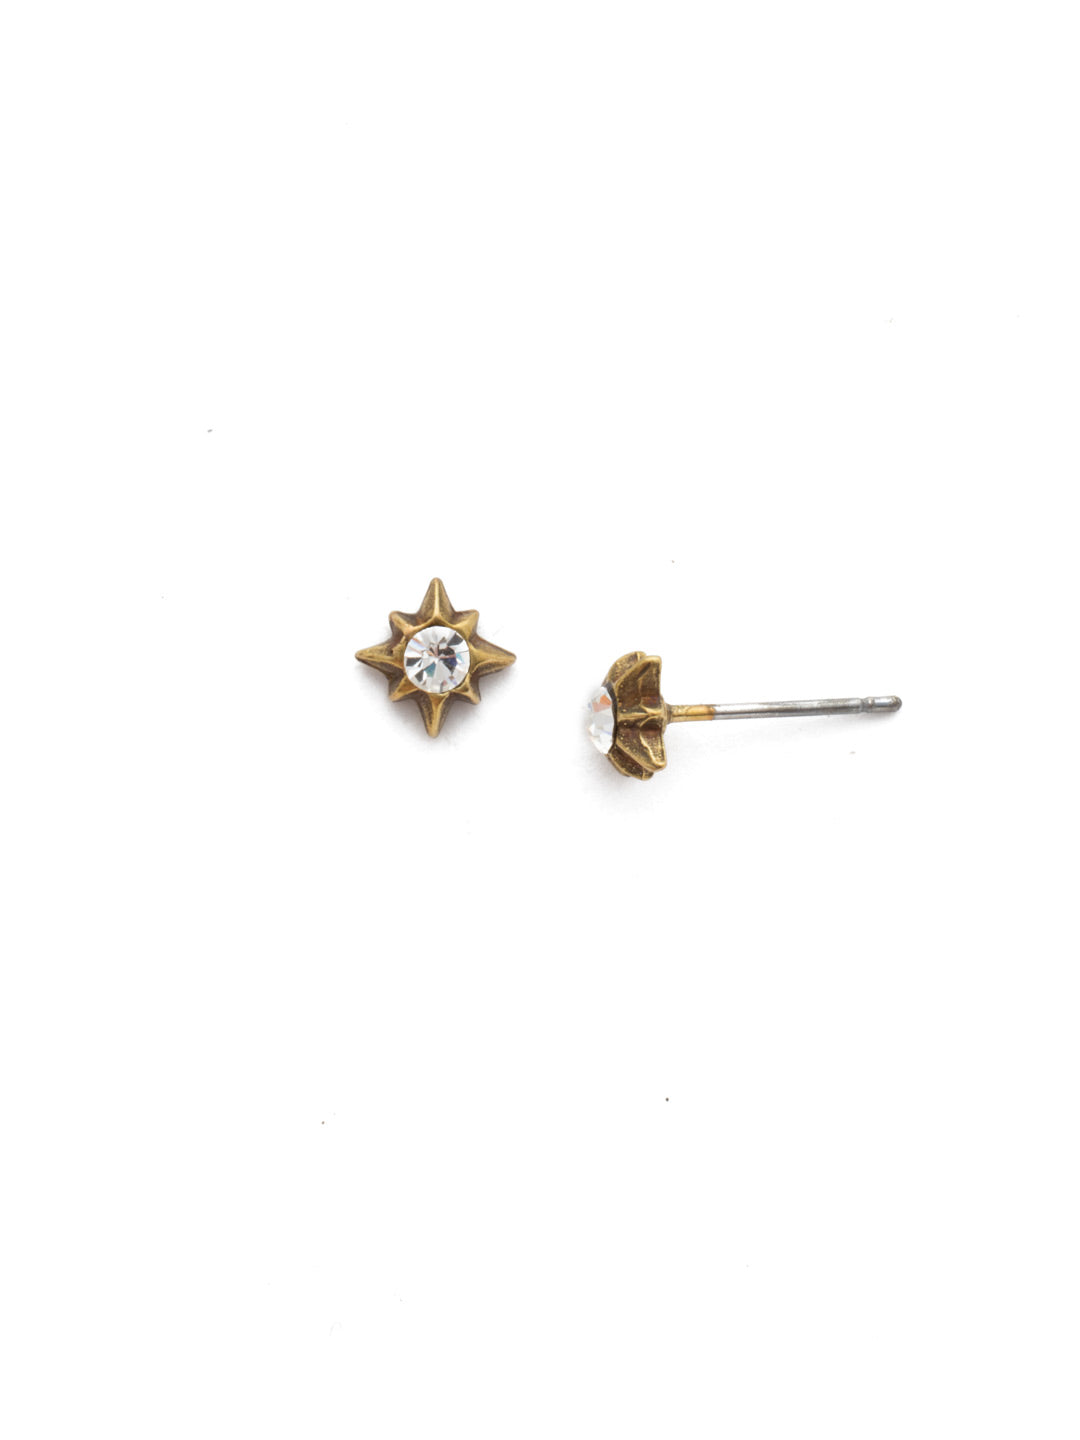 Estella Stud Earring - EEJ15AGCRY - A star-studded affair, the Estella Stud Earrings will have everyone talking. A delicate freshwater pearl sits in the center of a metal star. From Sorrelli's Crystal collection in our Antique Gold-tone finish.